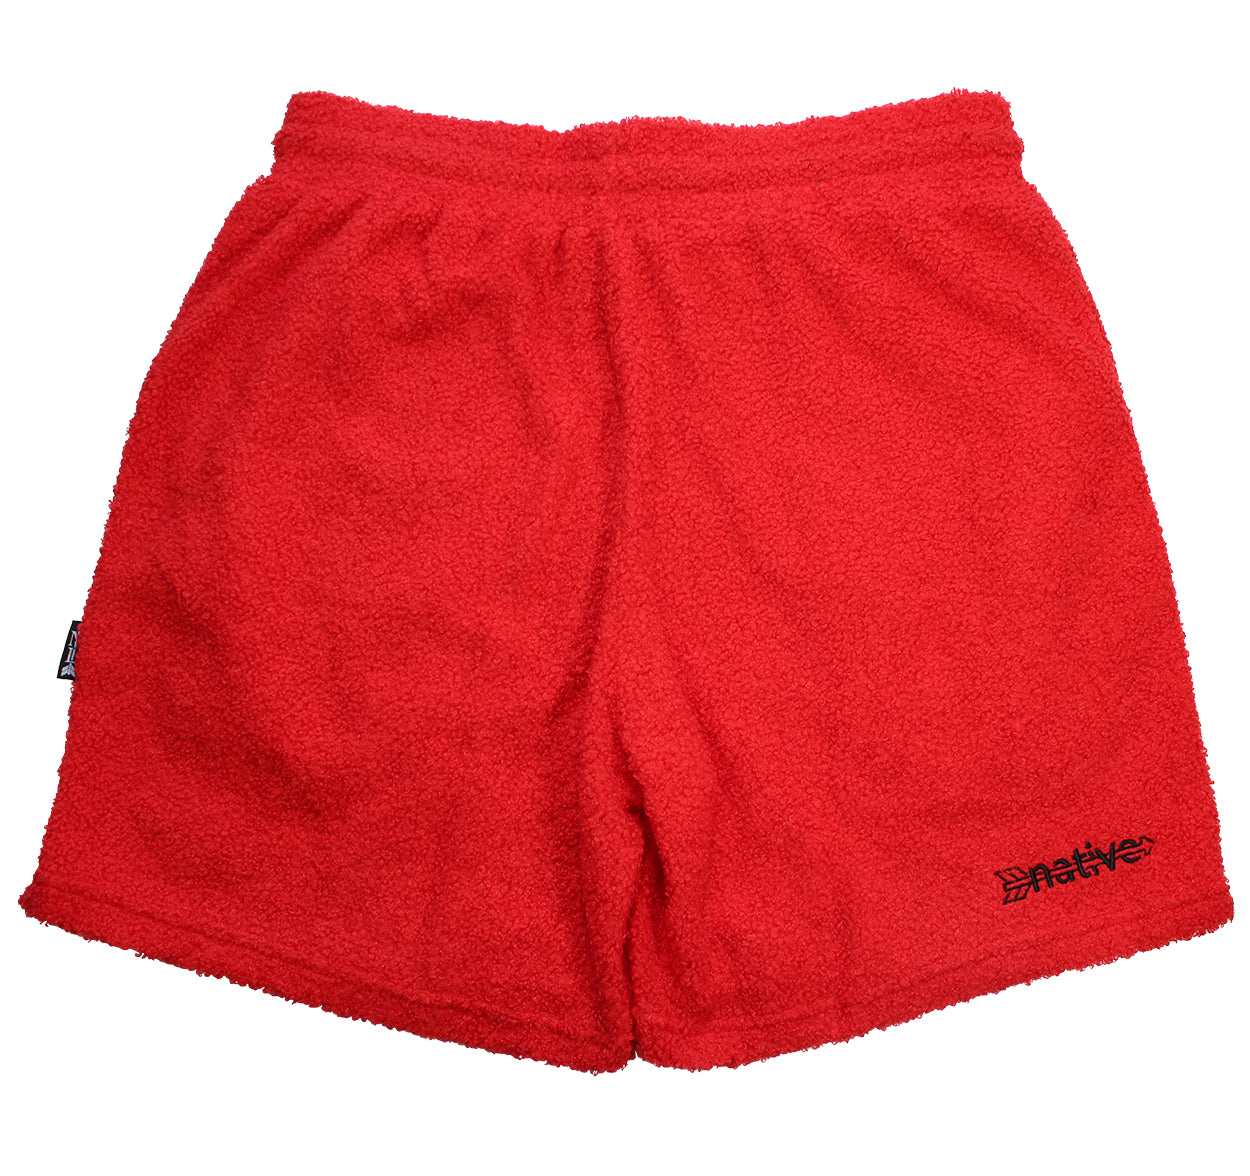 sherpa shorts in red